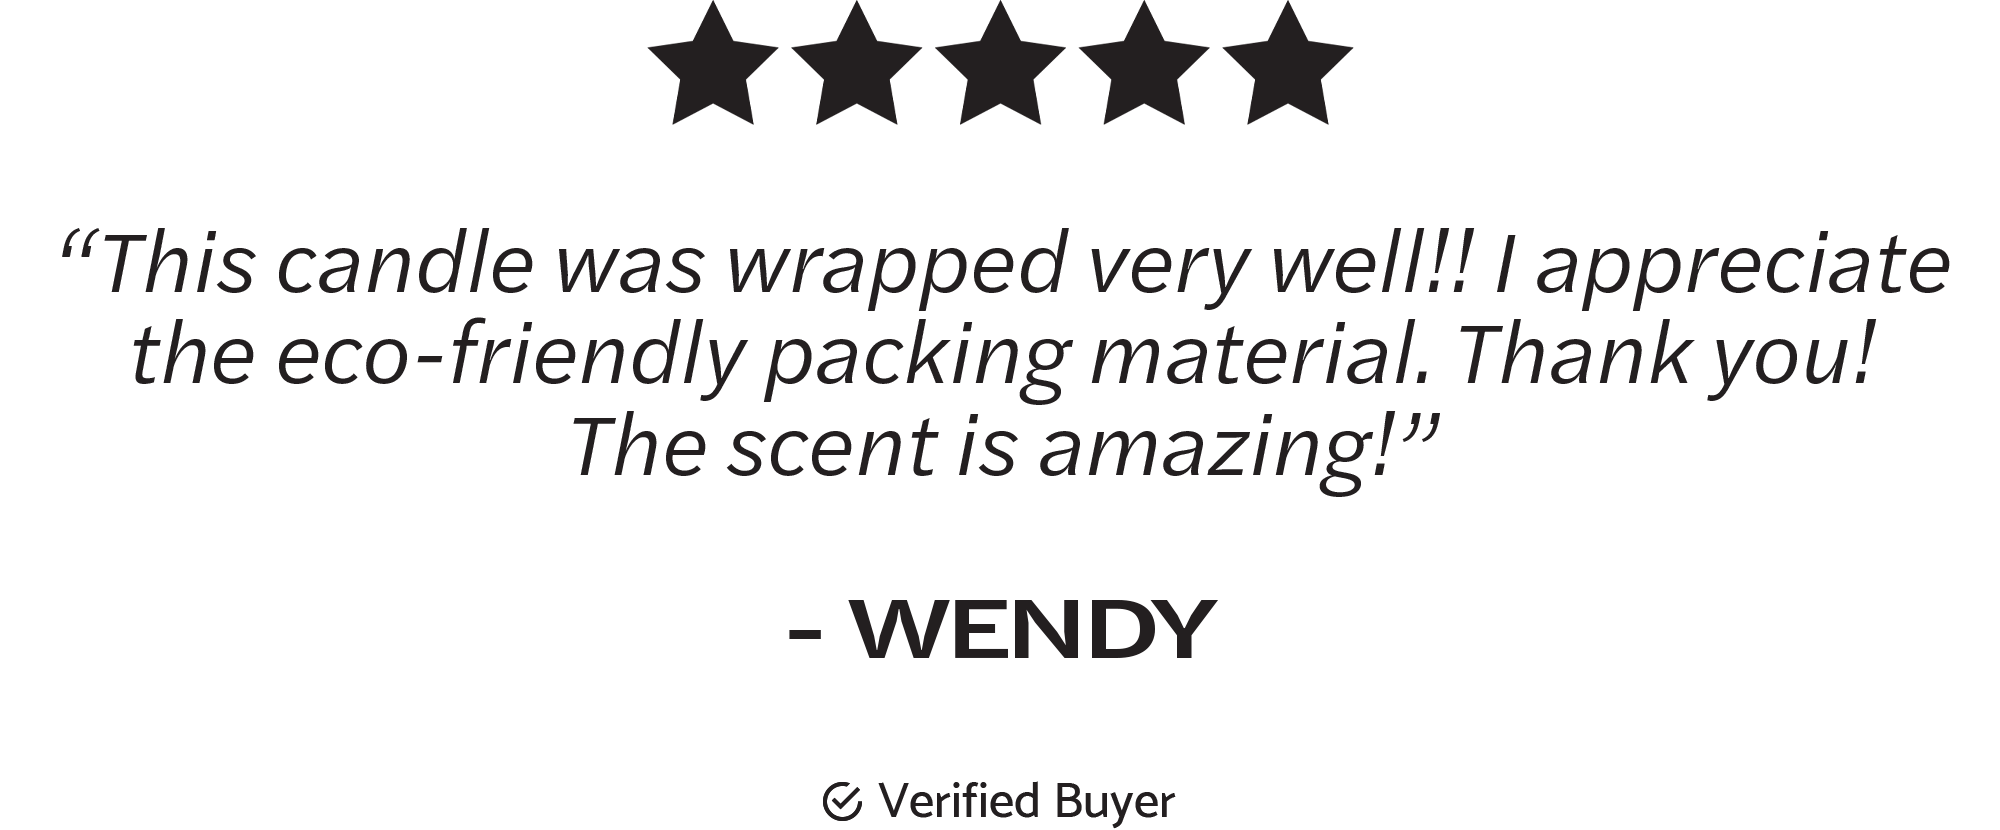 “This candle was wrapped very well!! I appreciate the eco-friendly packing material. Thank you! The scent is amazing!”  - WENDY